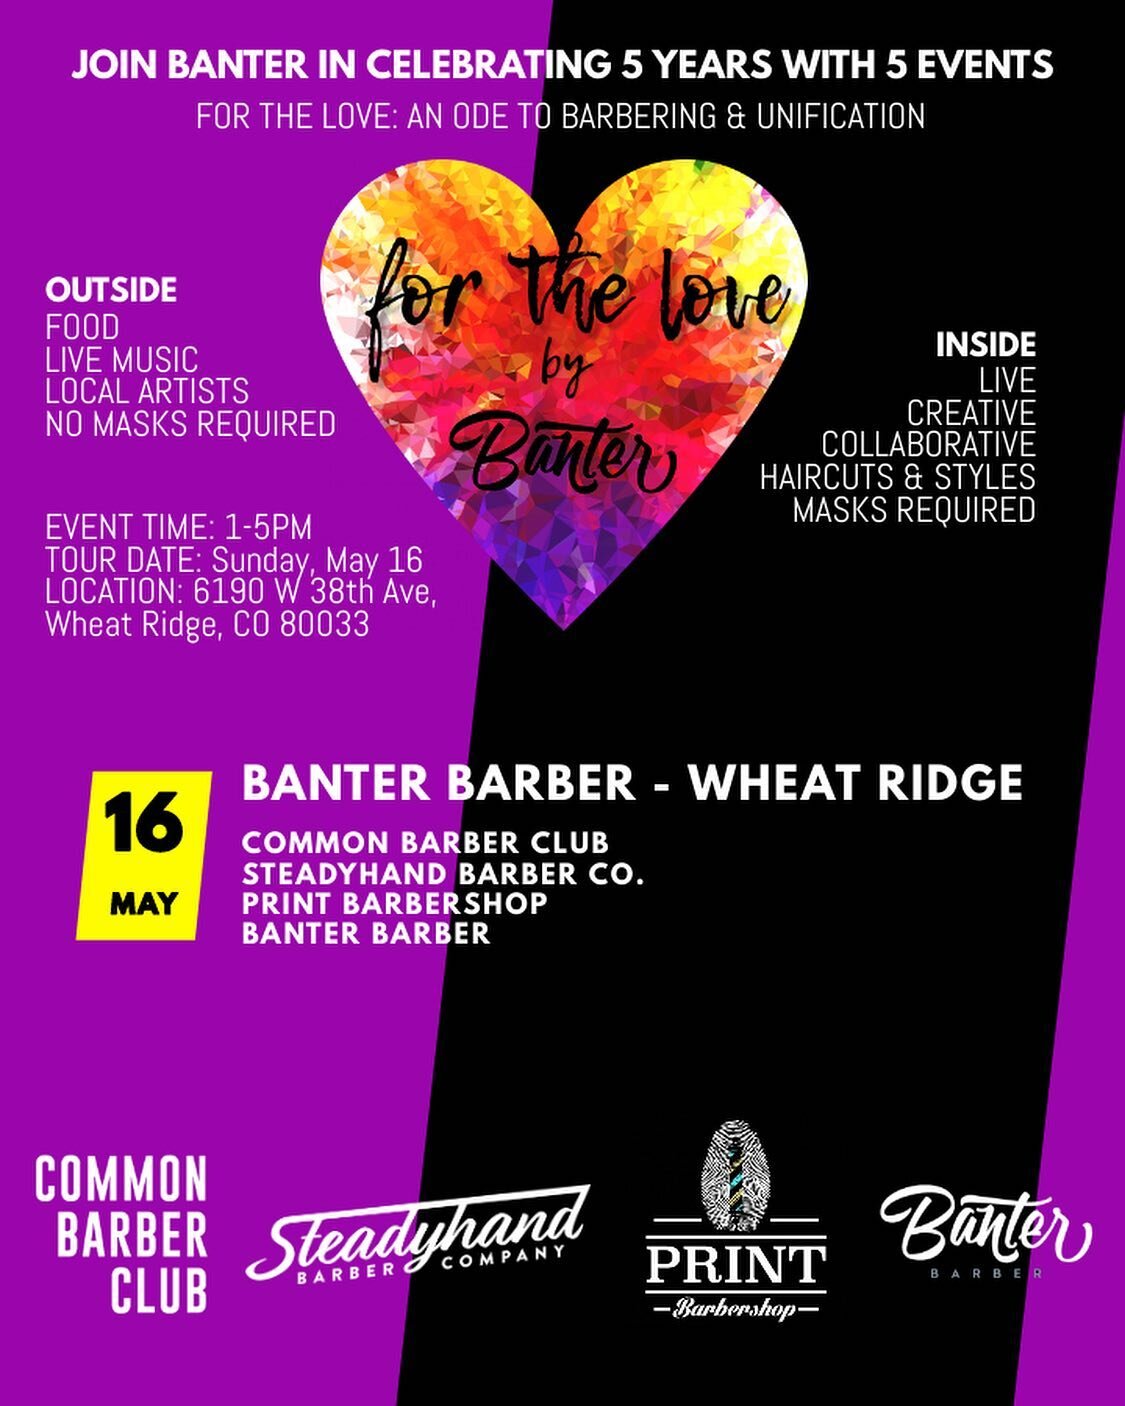 First and foremost and once again, we shout out all of the mothers that made us. We&rsquo;re grateful to be here. We thank you 🥰😘😍 

And NEXT! Join us this Sunday May 16 at Banter Barber in Wheat Ridge CO on 38th Ave for an afternoon of craftsmans